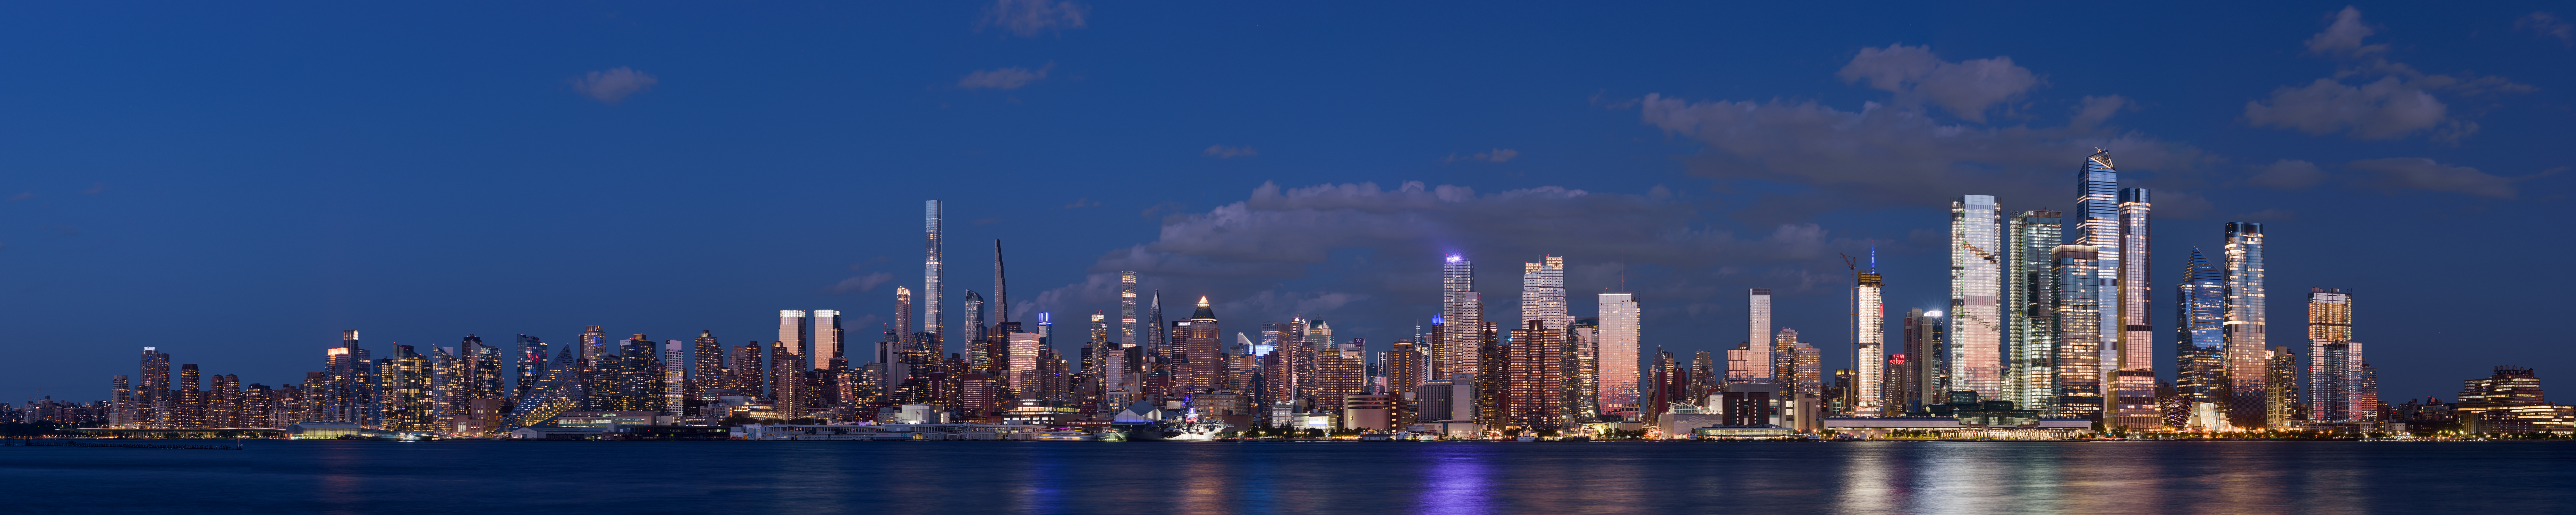 HDR panorama of Midtown Manhattan, New York City, as viewed from Weehawken, New Jersey by King of Hearts